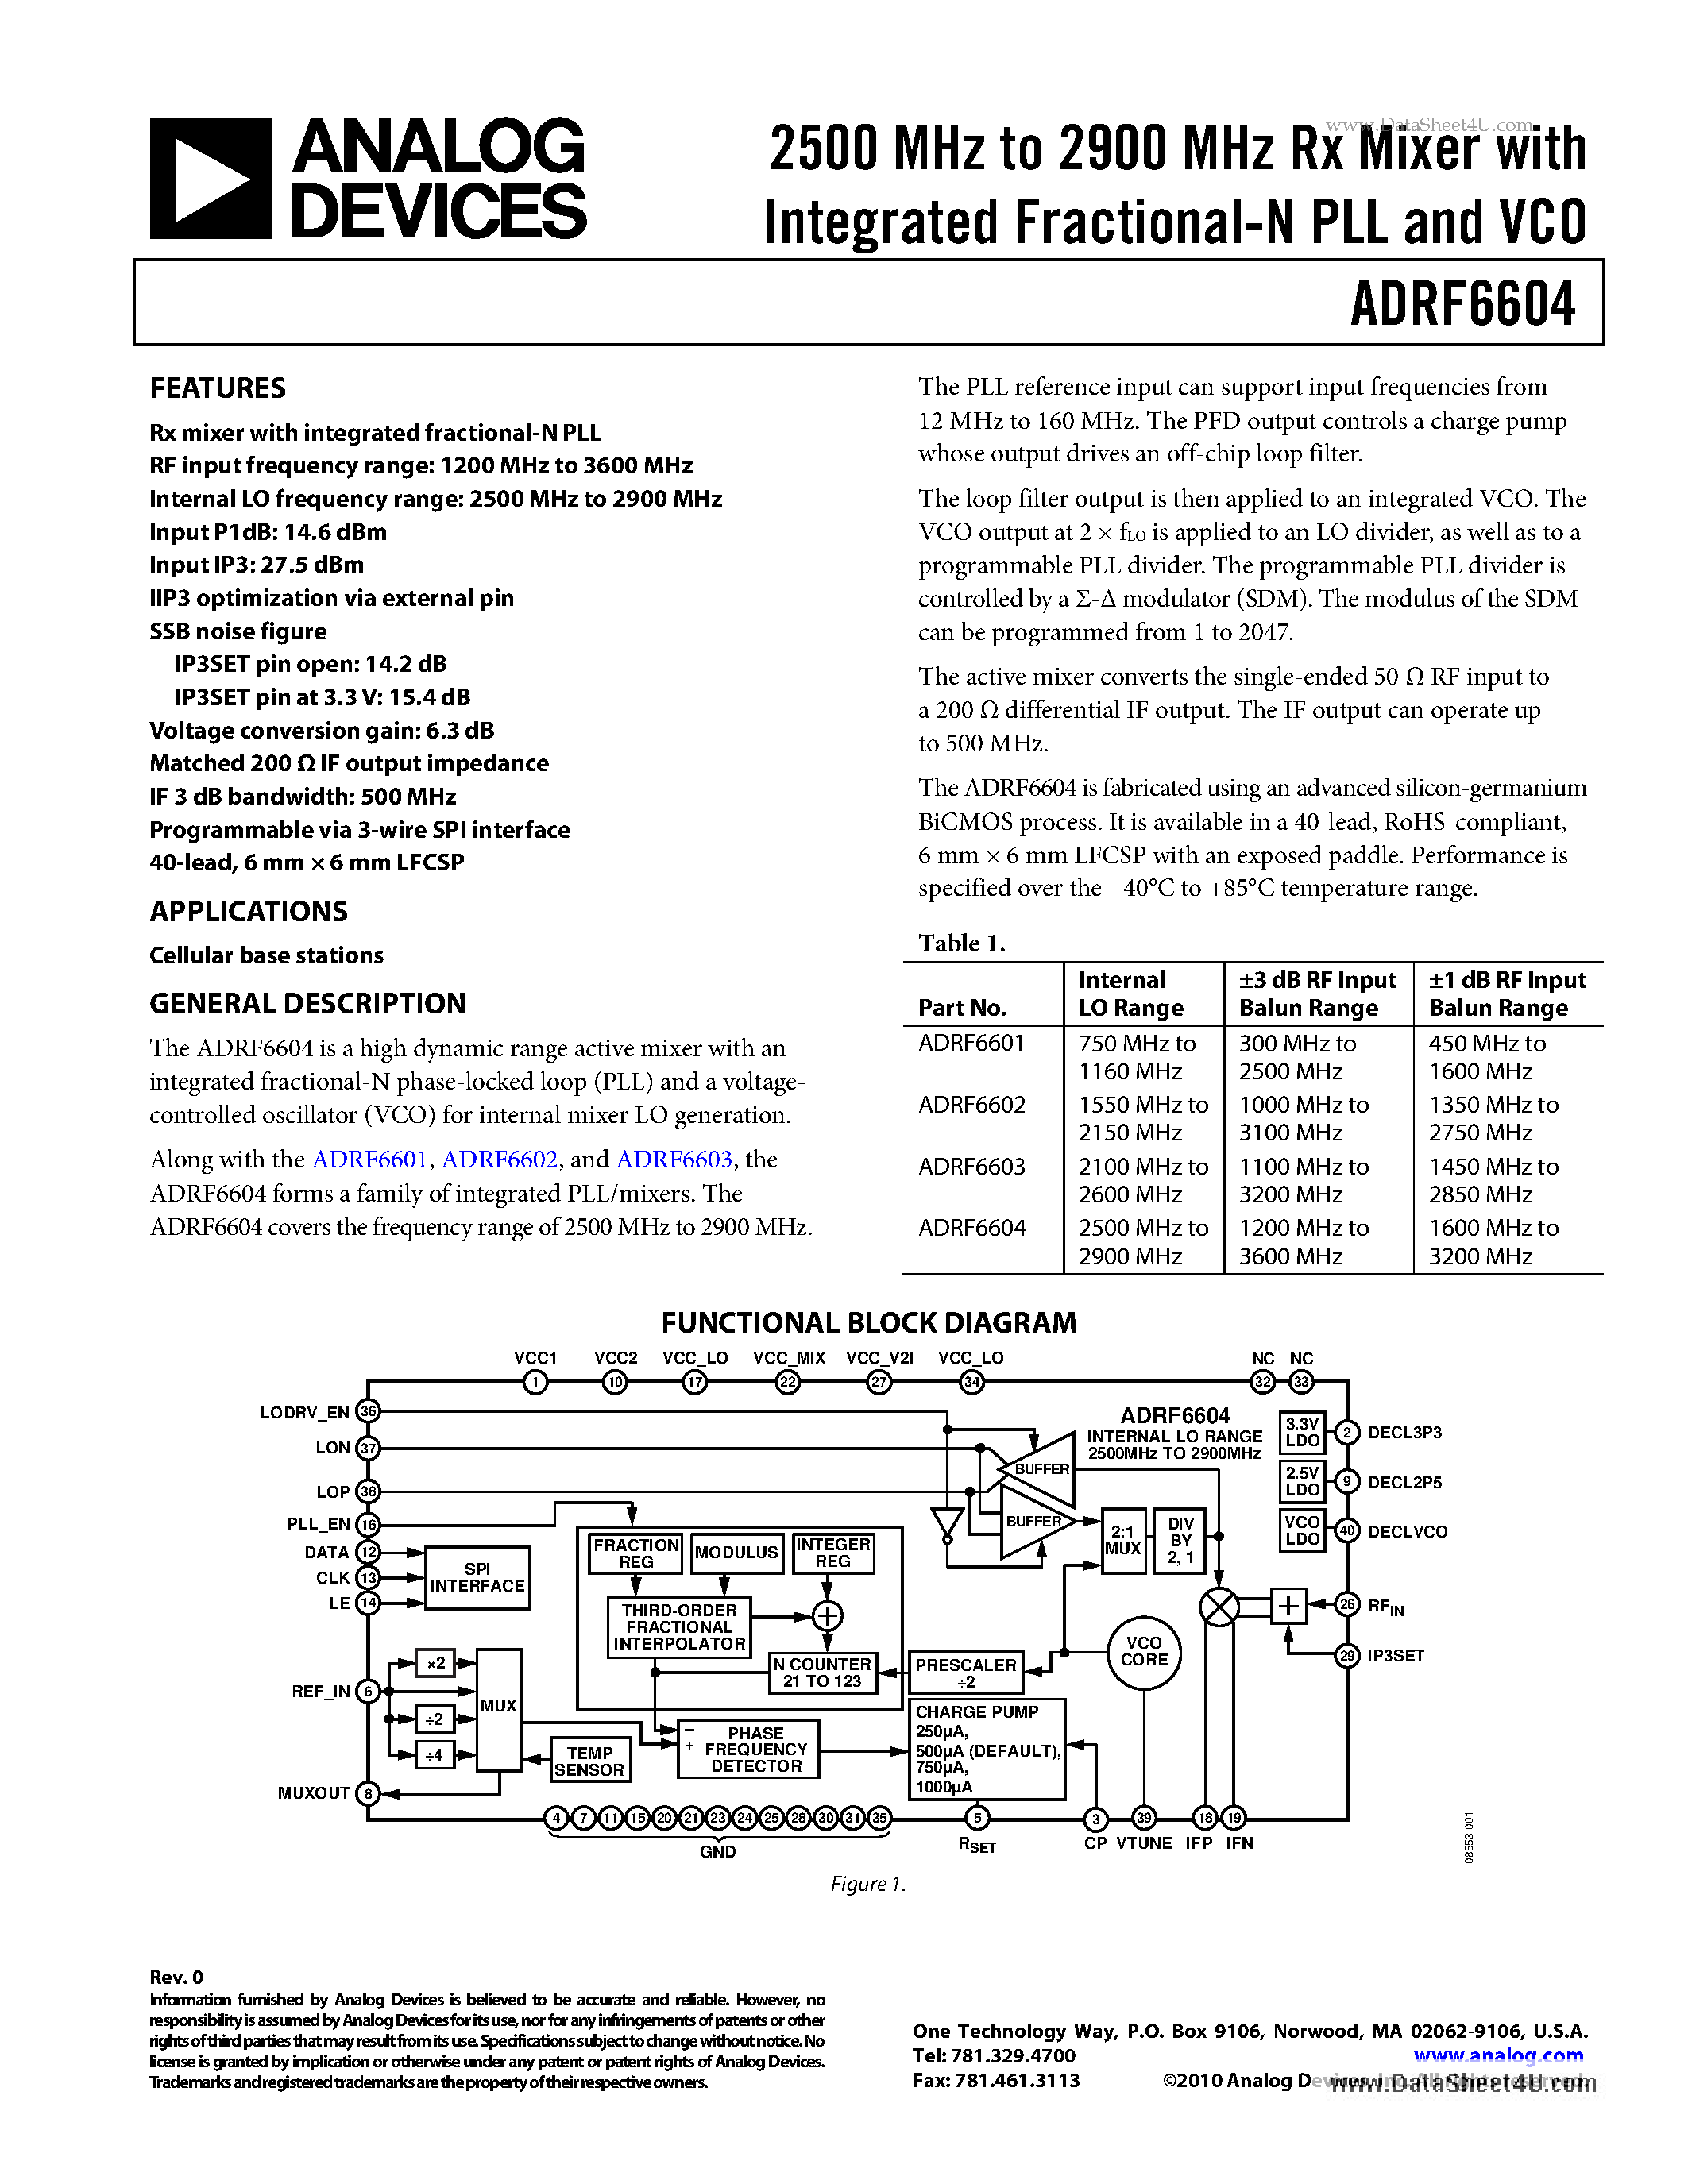 Даташит ADRF6604 - 2500 MHz to 2900 MHz Rx Mixer страница 1